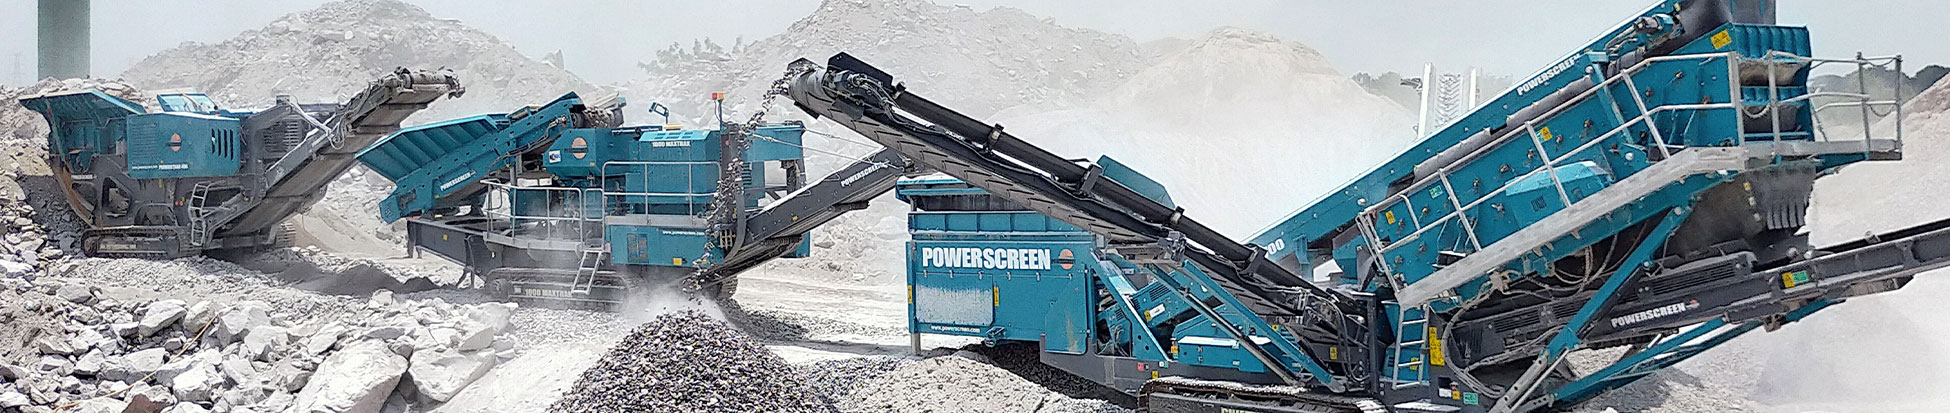 Powerscreen Email Preference Centre